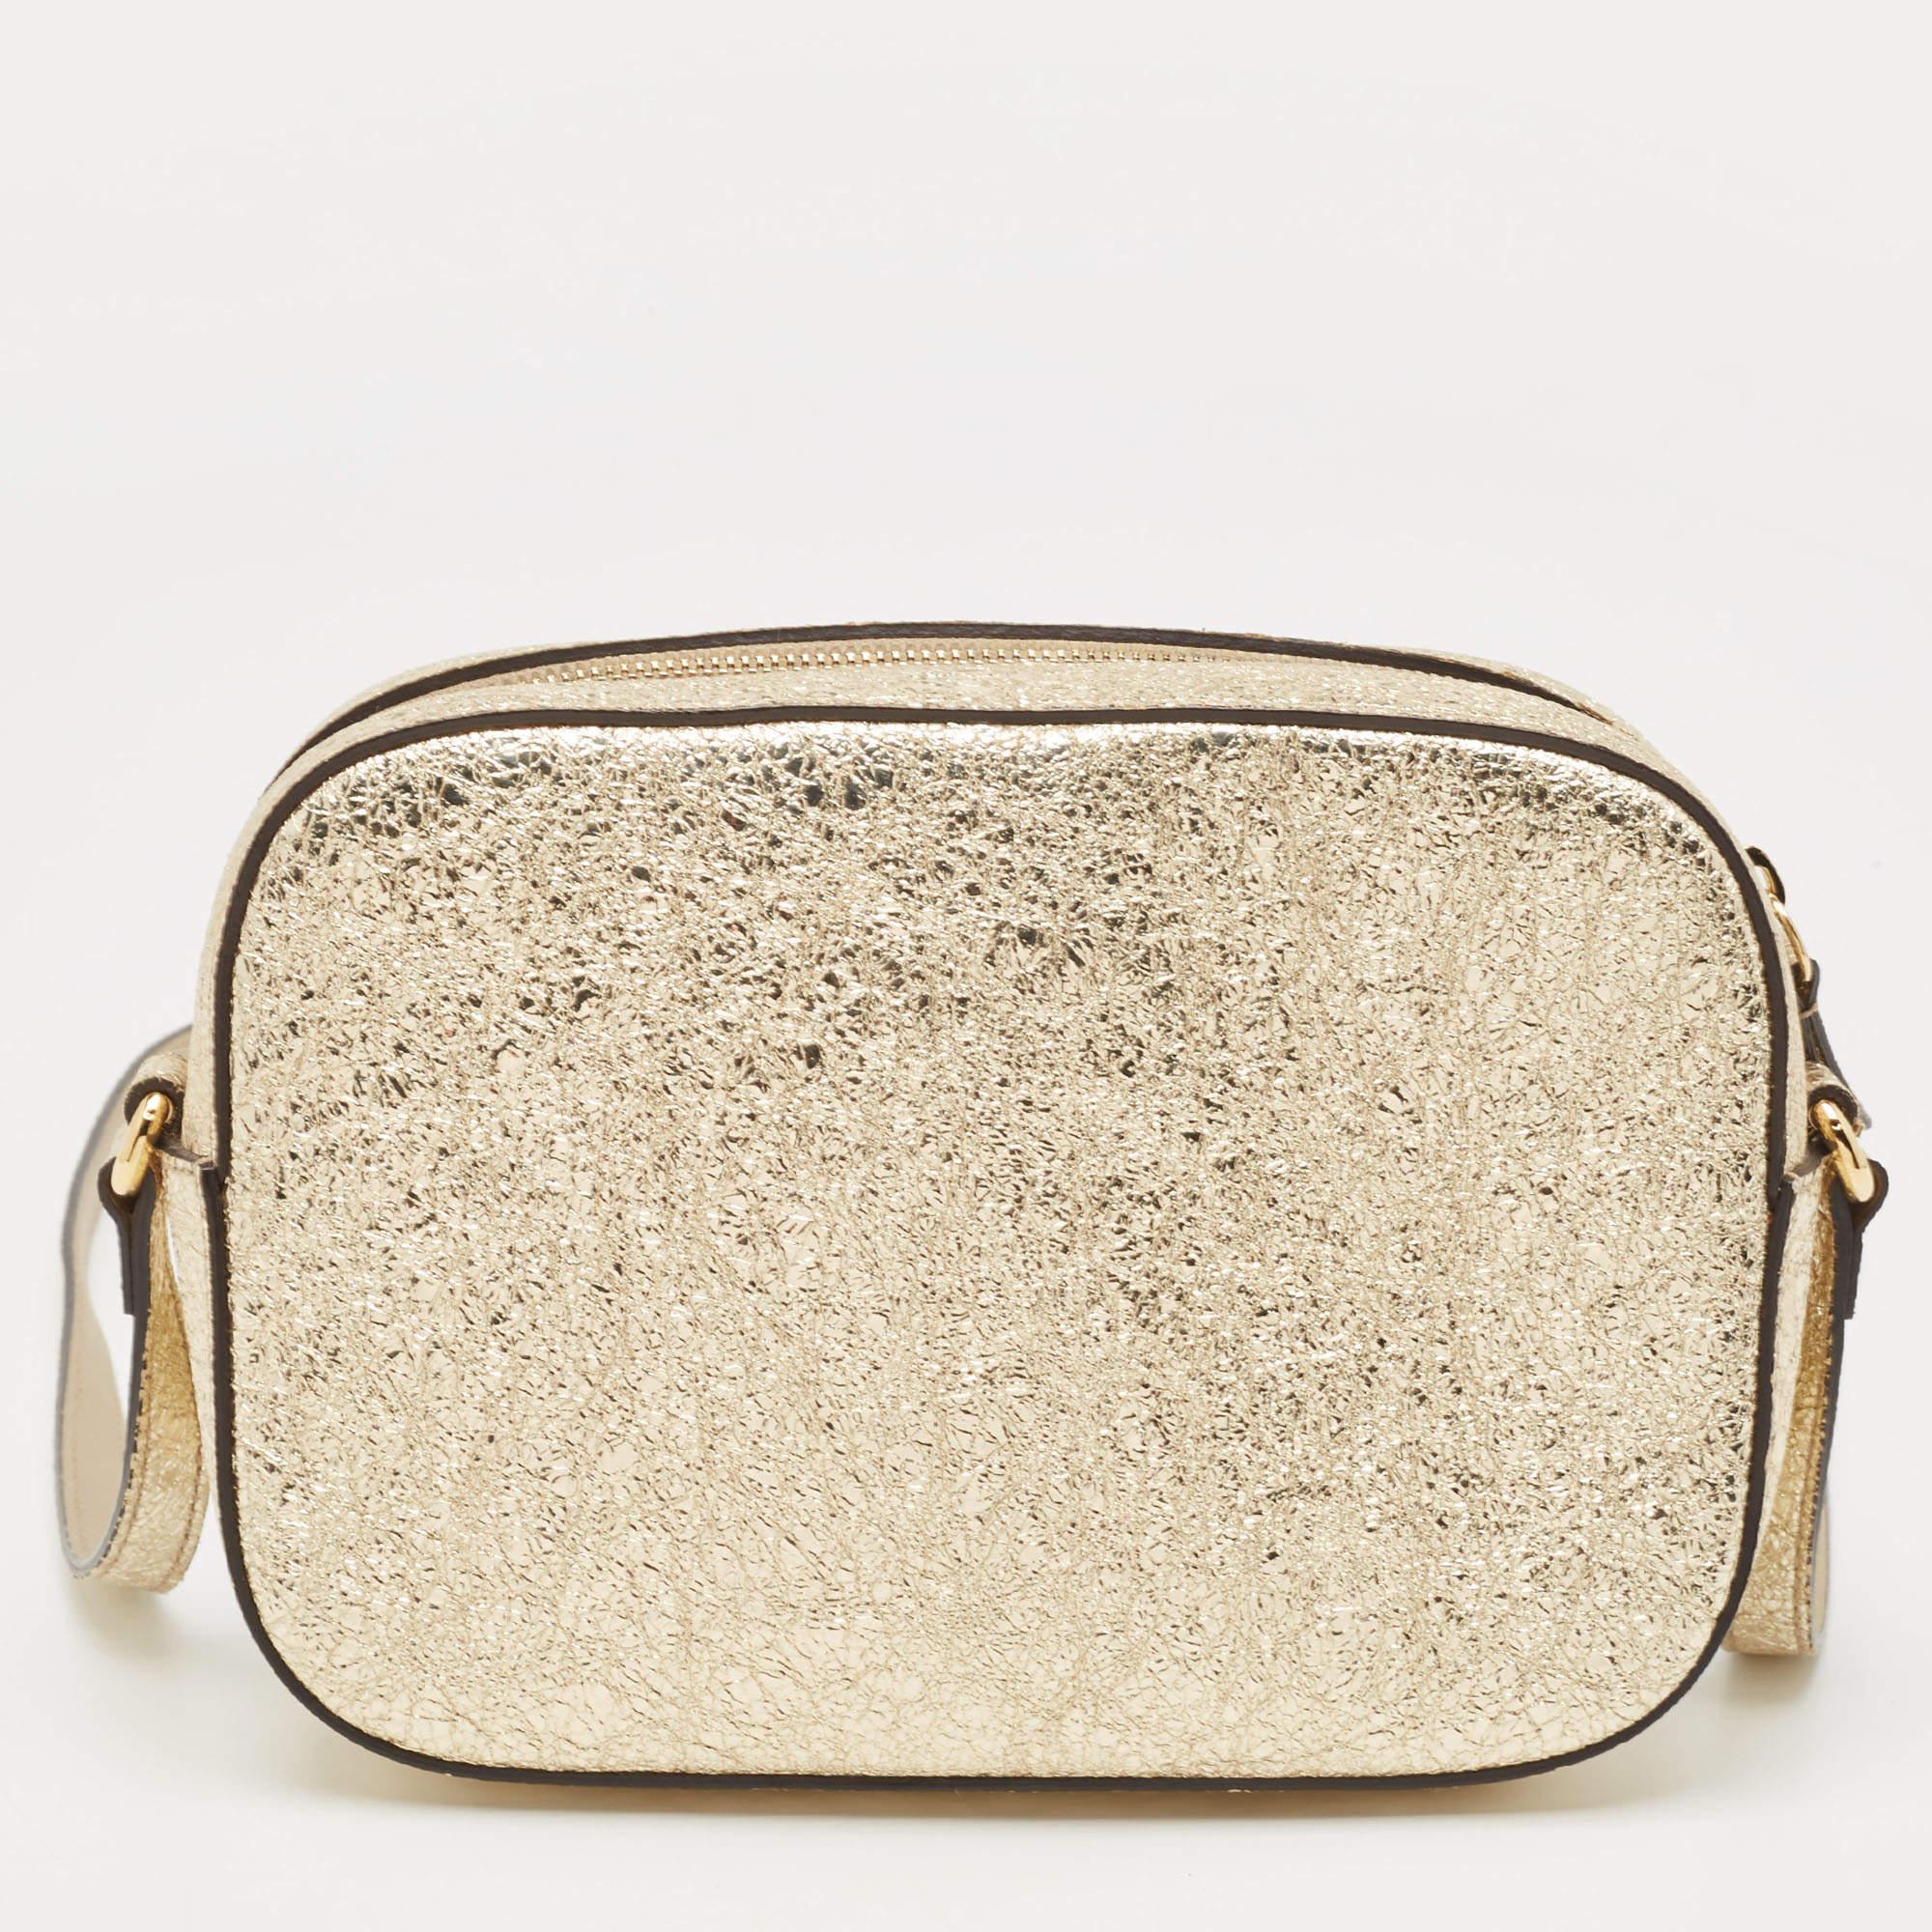 Bags are more than just instruments to carry one's essentials. They tell a woman's sense of style and the better the bag, the more confidence she gets when she holds it. Gucci brings you one such fabulous bag meticulously made from metallic gold,